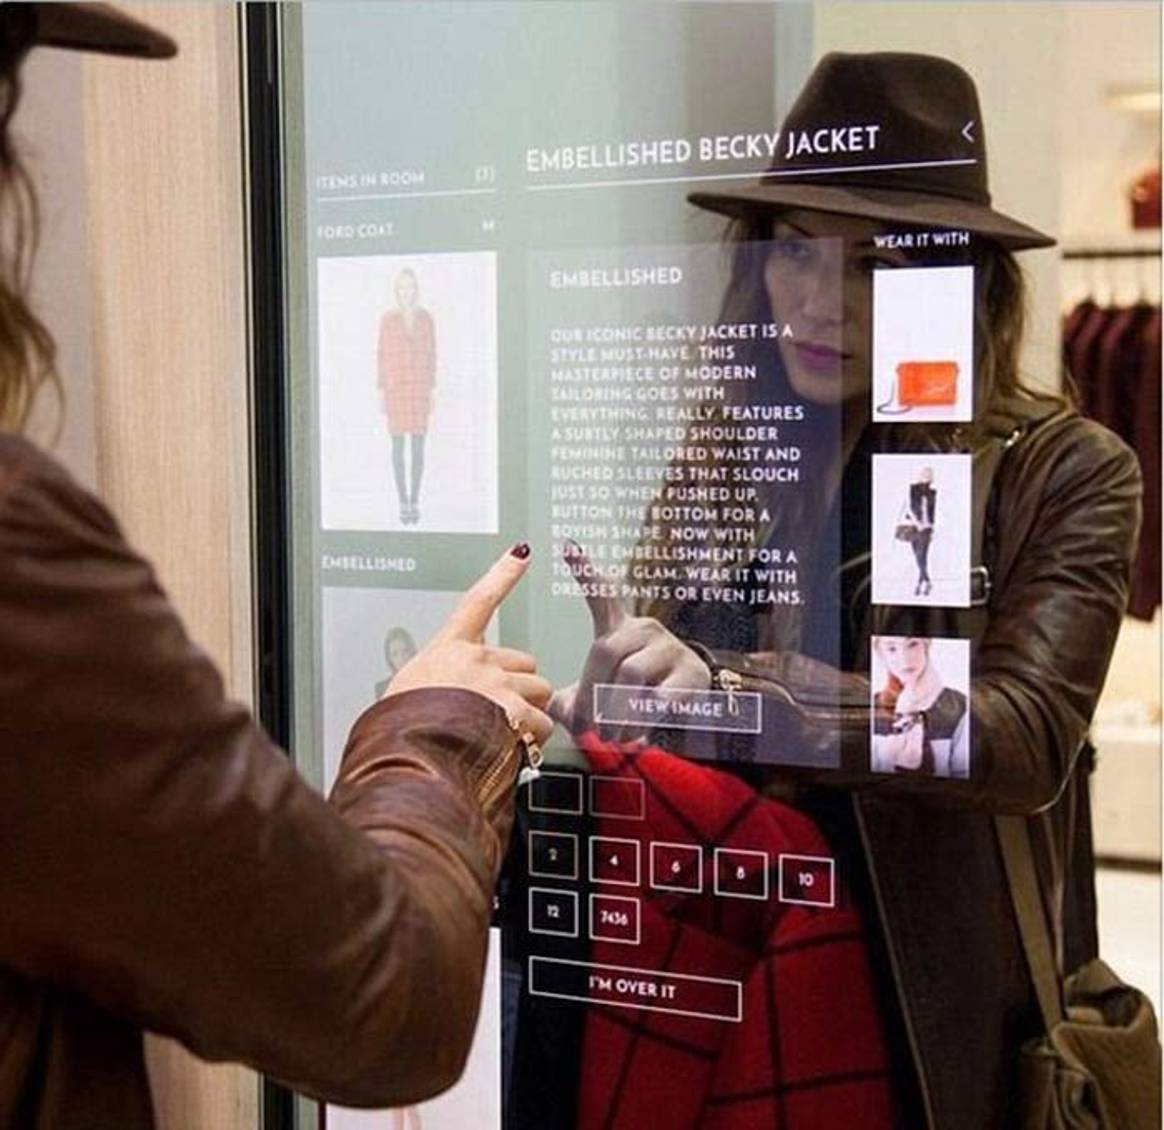 7 ways in which the retail landscape might dramatically change over the next few years